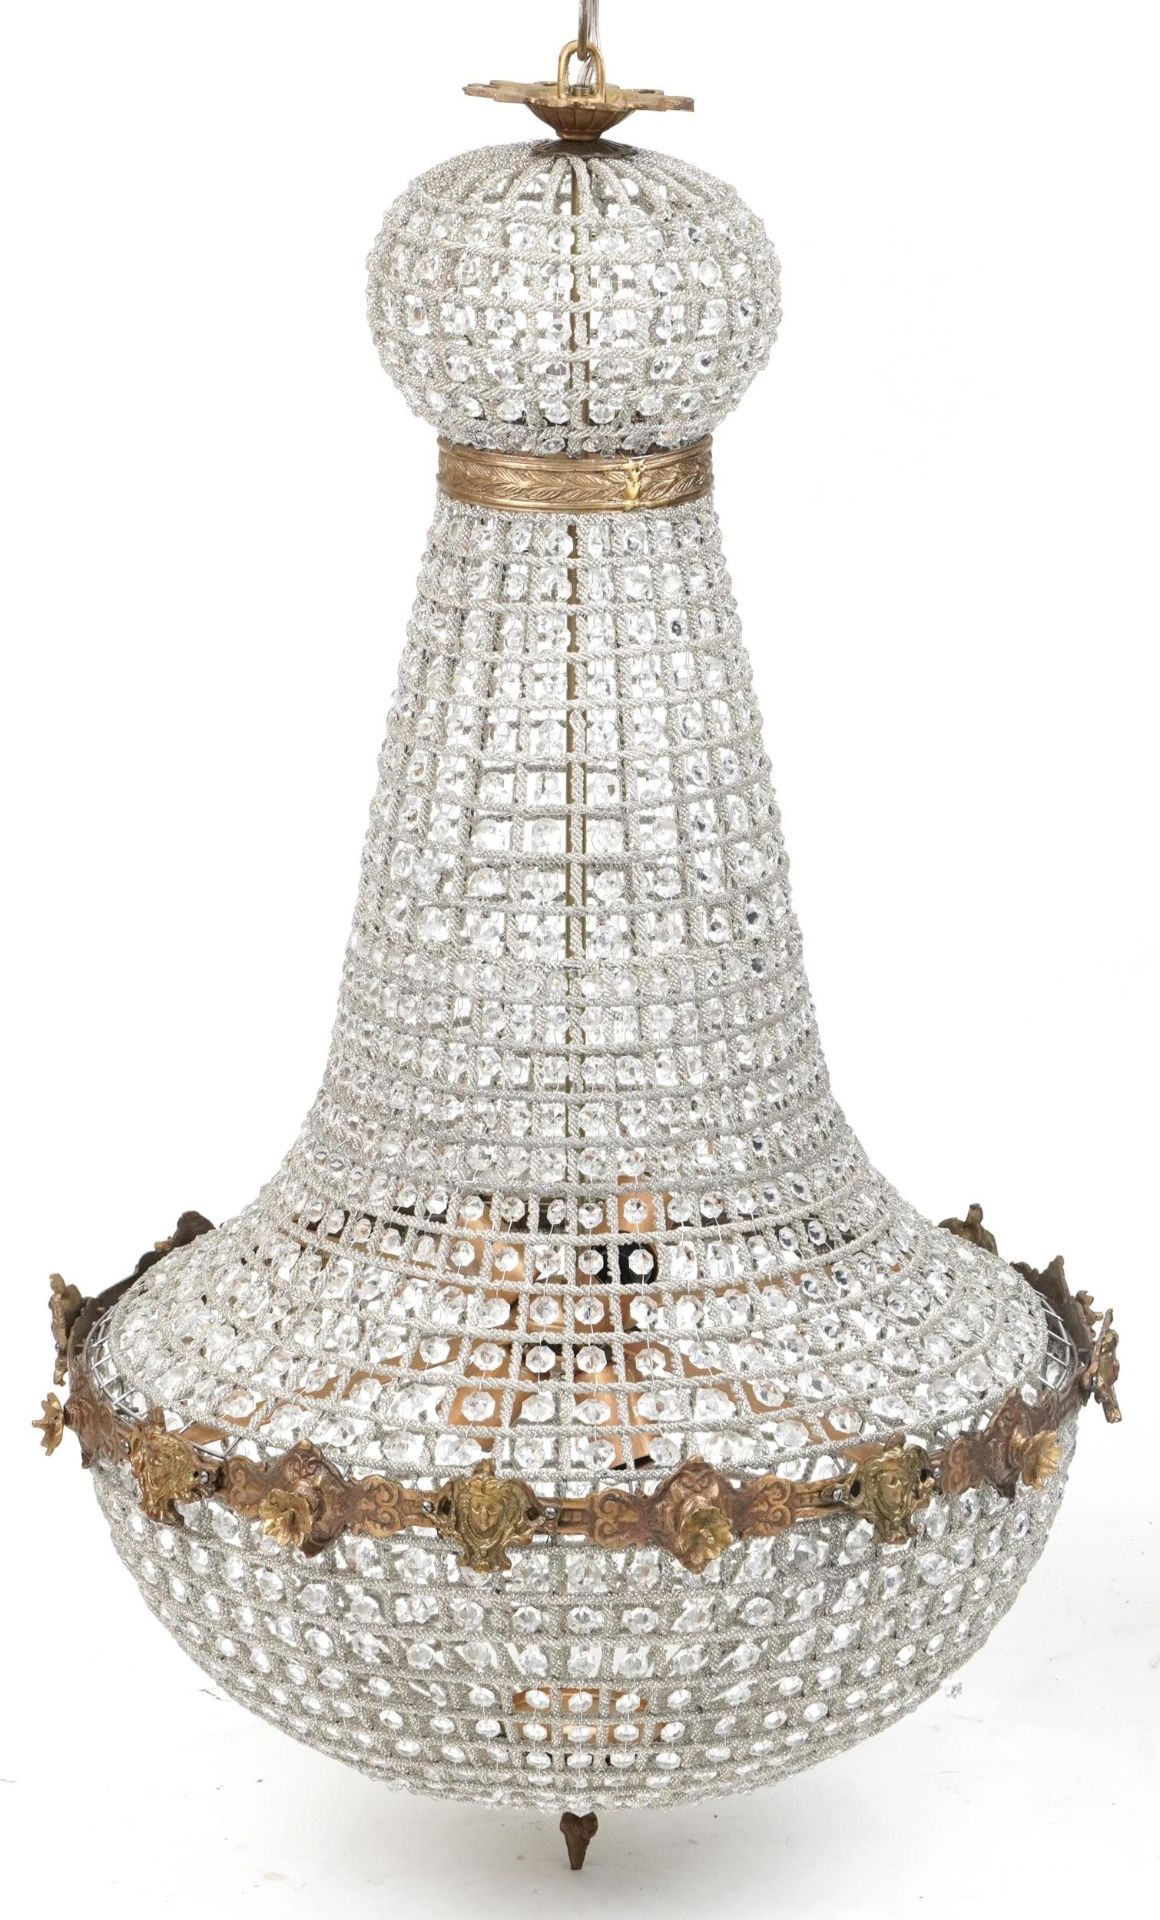 Large ornate chandelier with gilt brass mounts, approximately 115cm high x 60cm in diameter